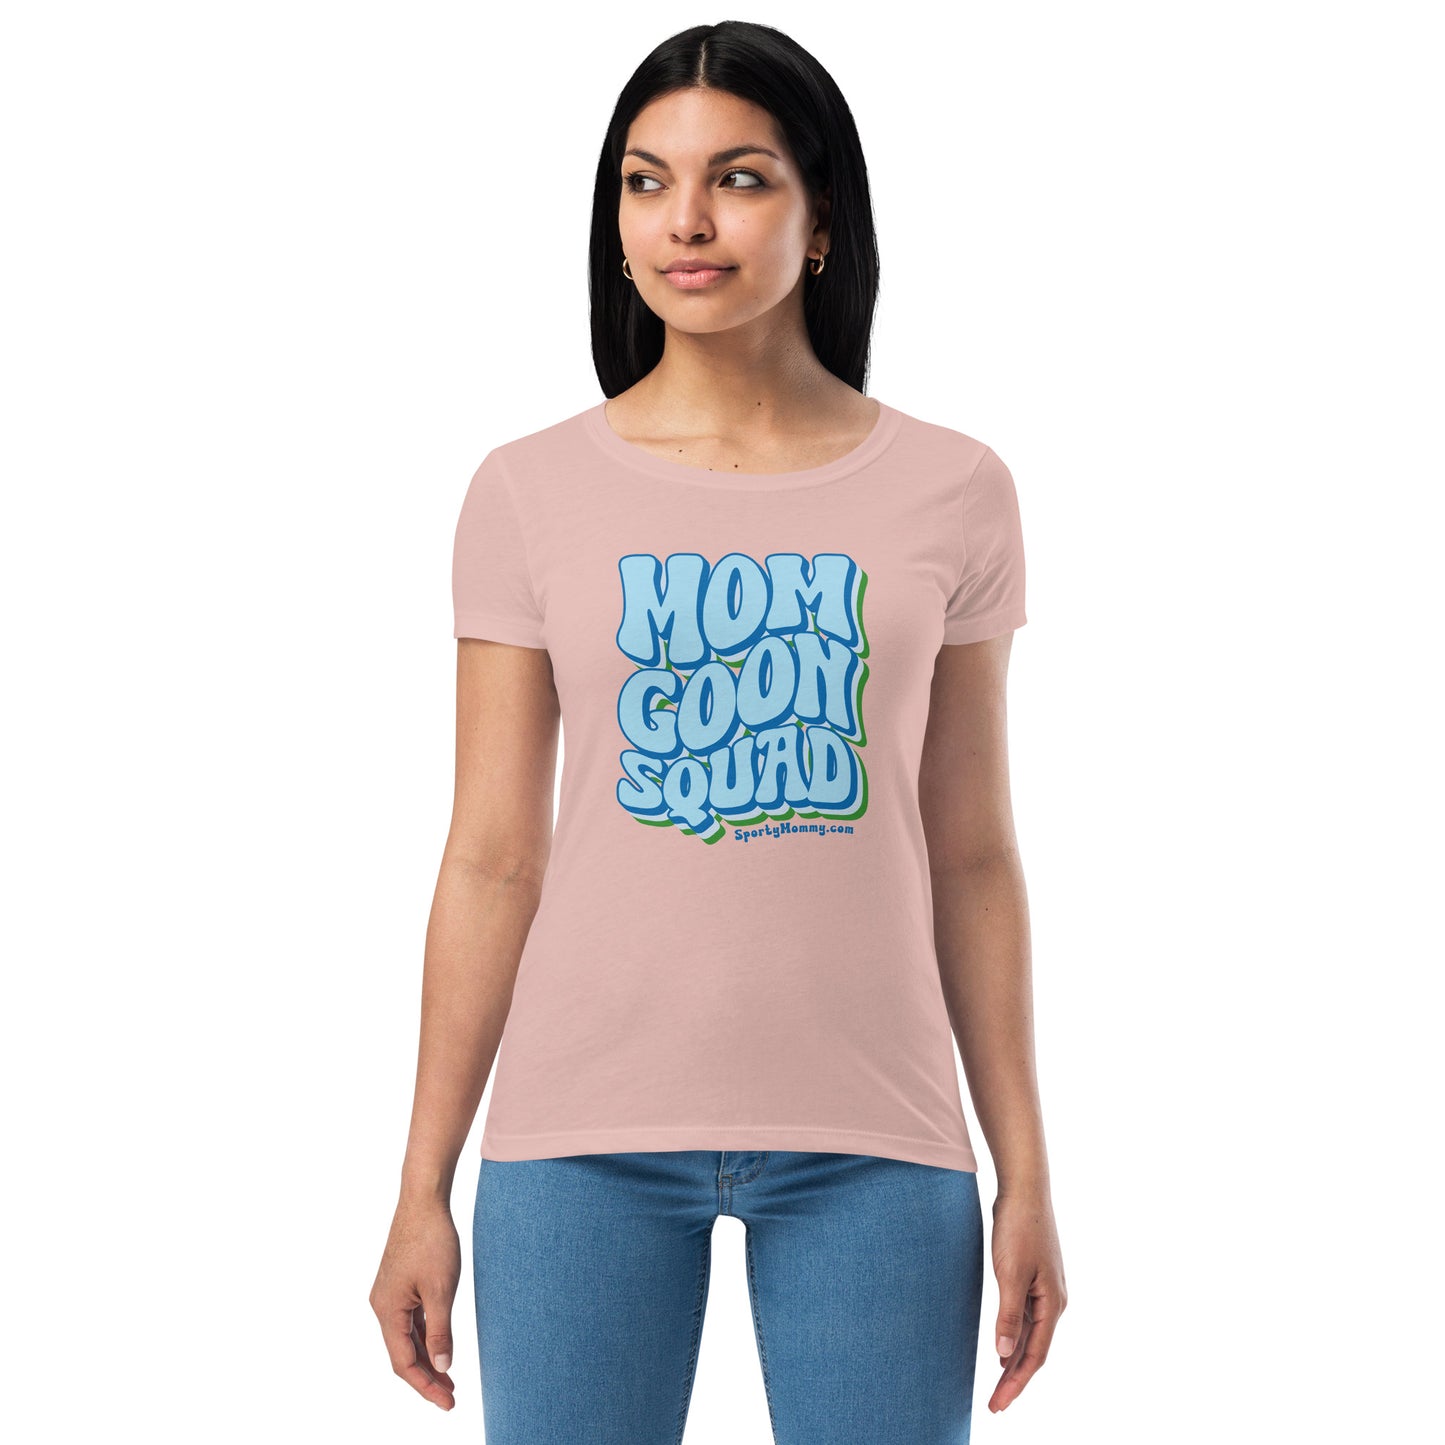 Mom Goon Squad Fitted T-Shirt